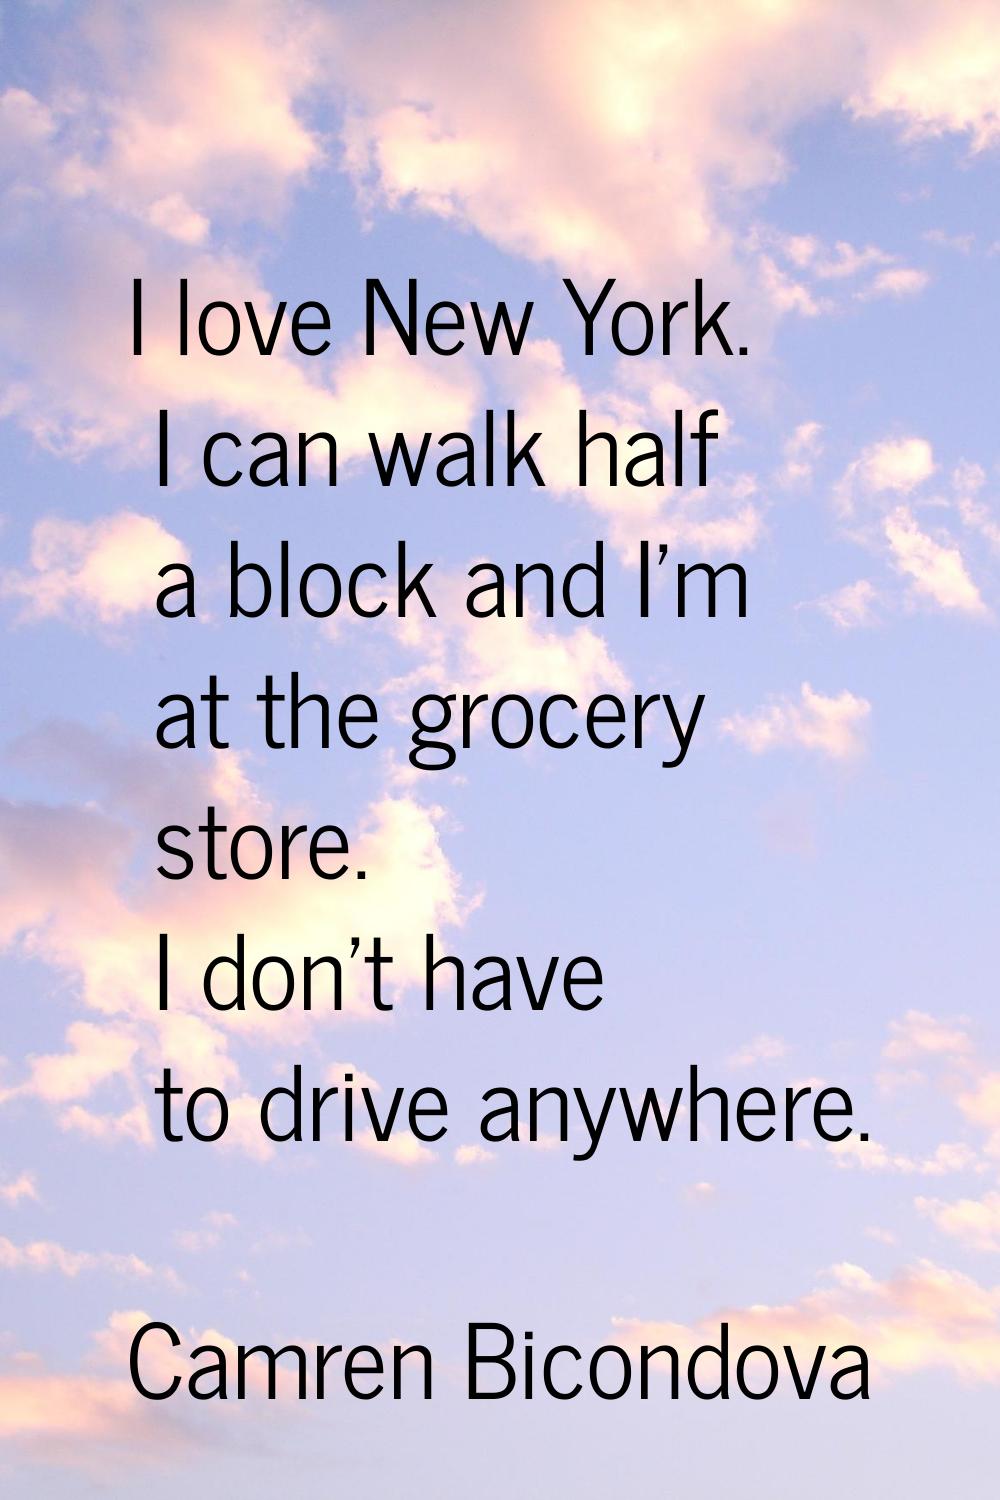 I love New York. I can walk half a block and I'm at the grocery store. I don't have to drive anywhe